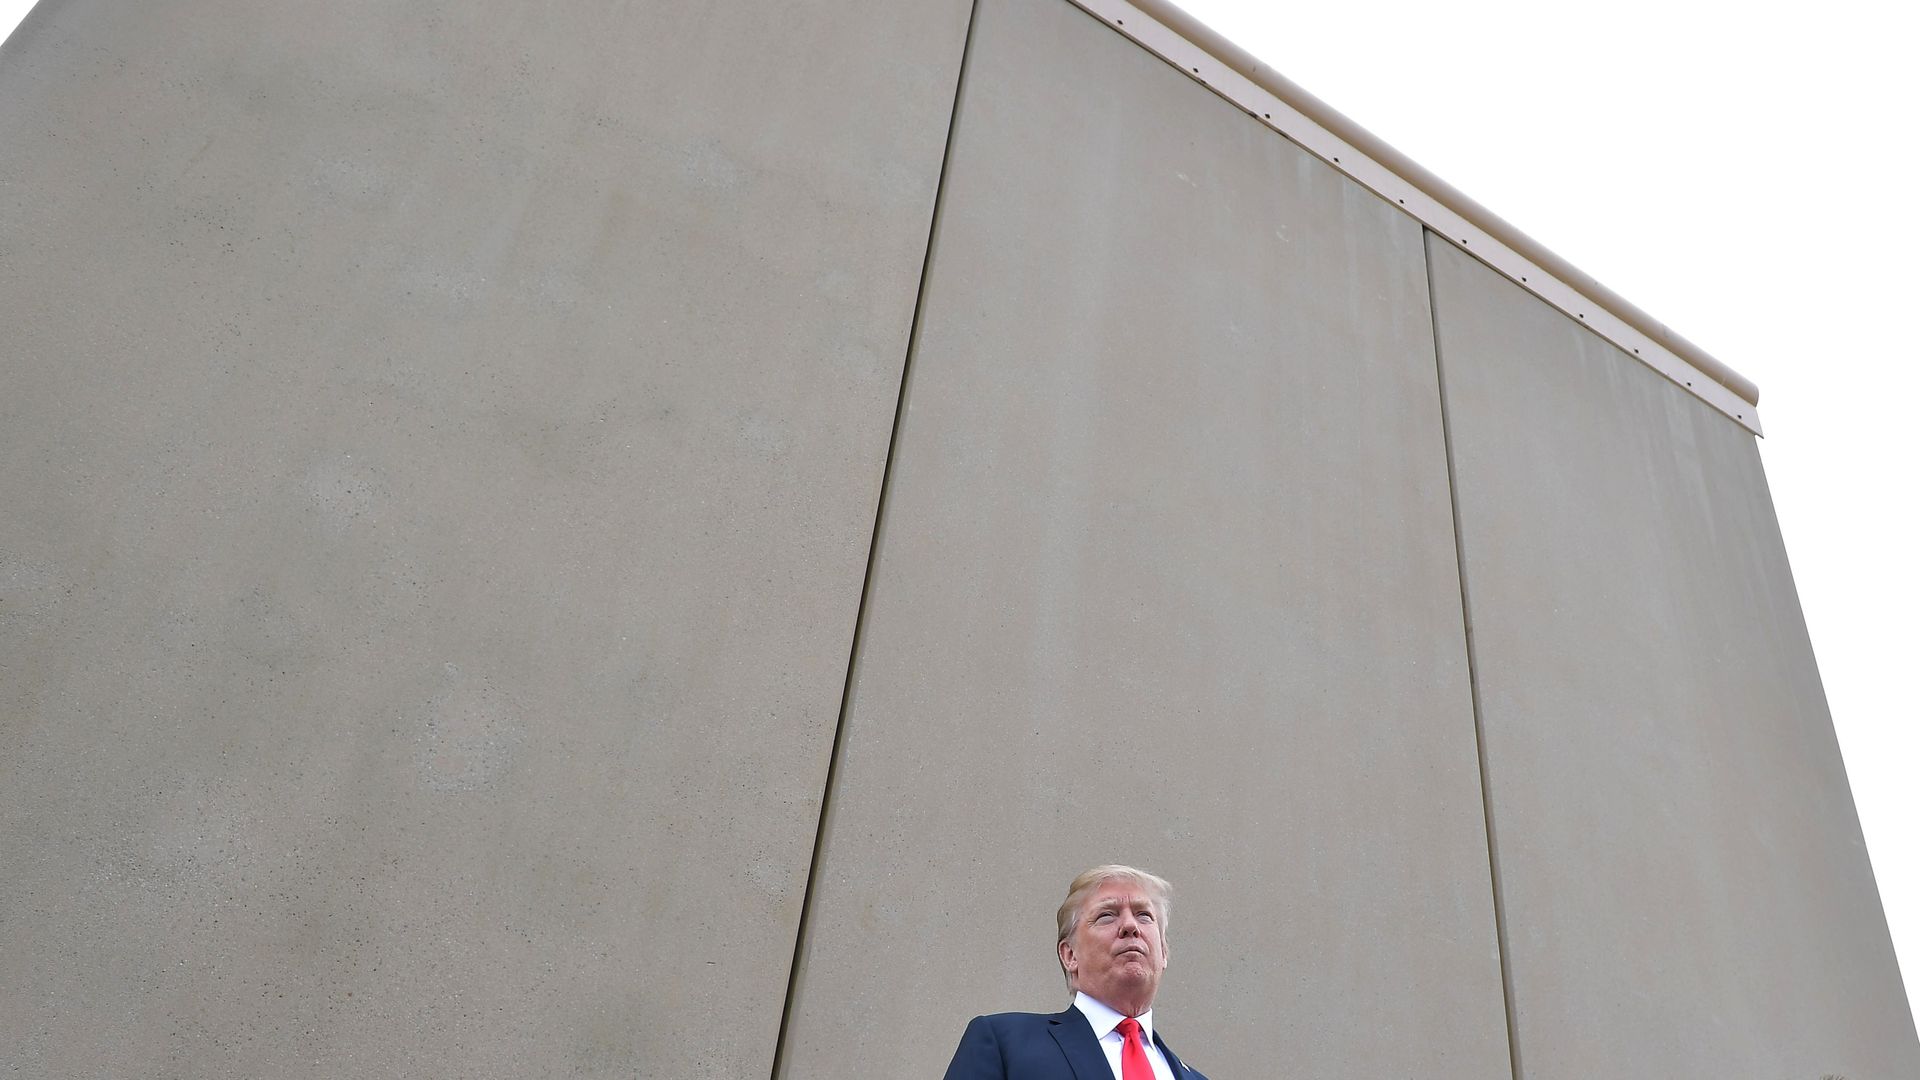 Donald Trump standing in front of border wall prototype